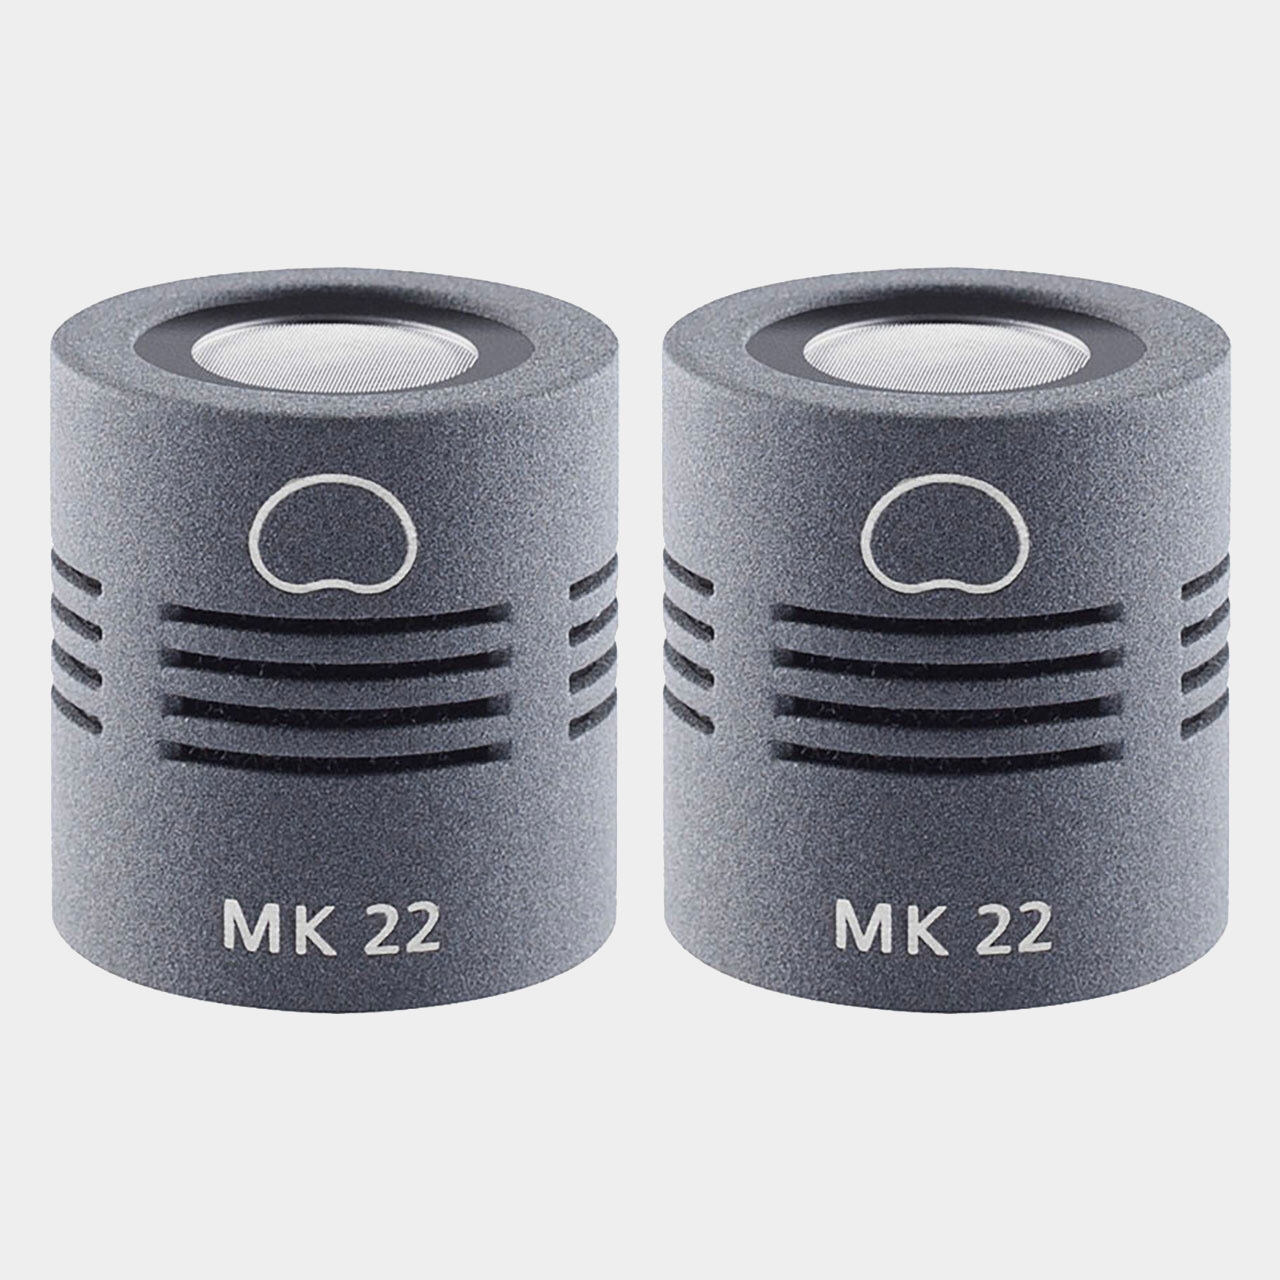 Schoeps MK 22 Open Cardioid Capsule (Matched Pair)